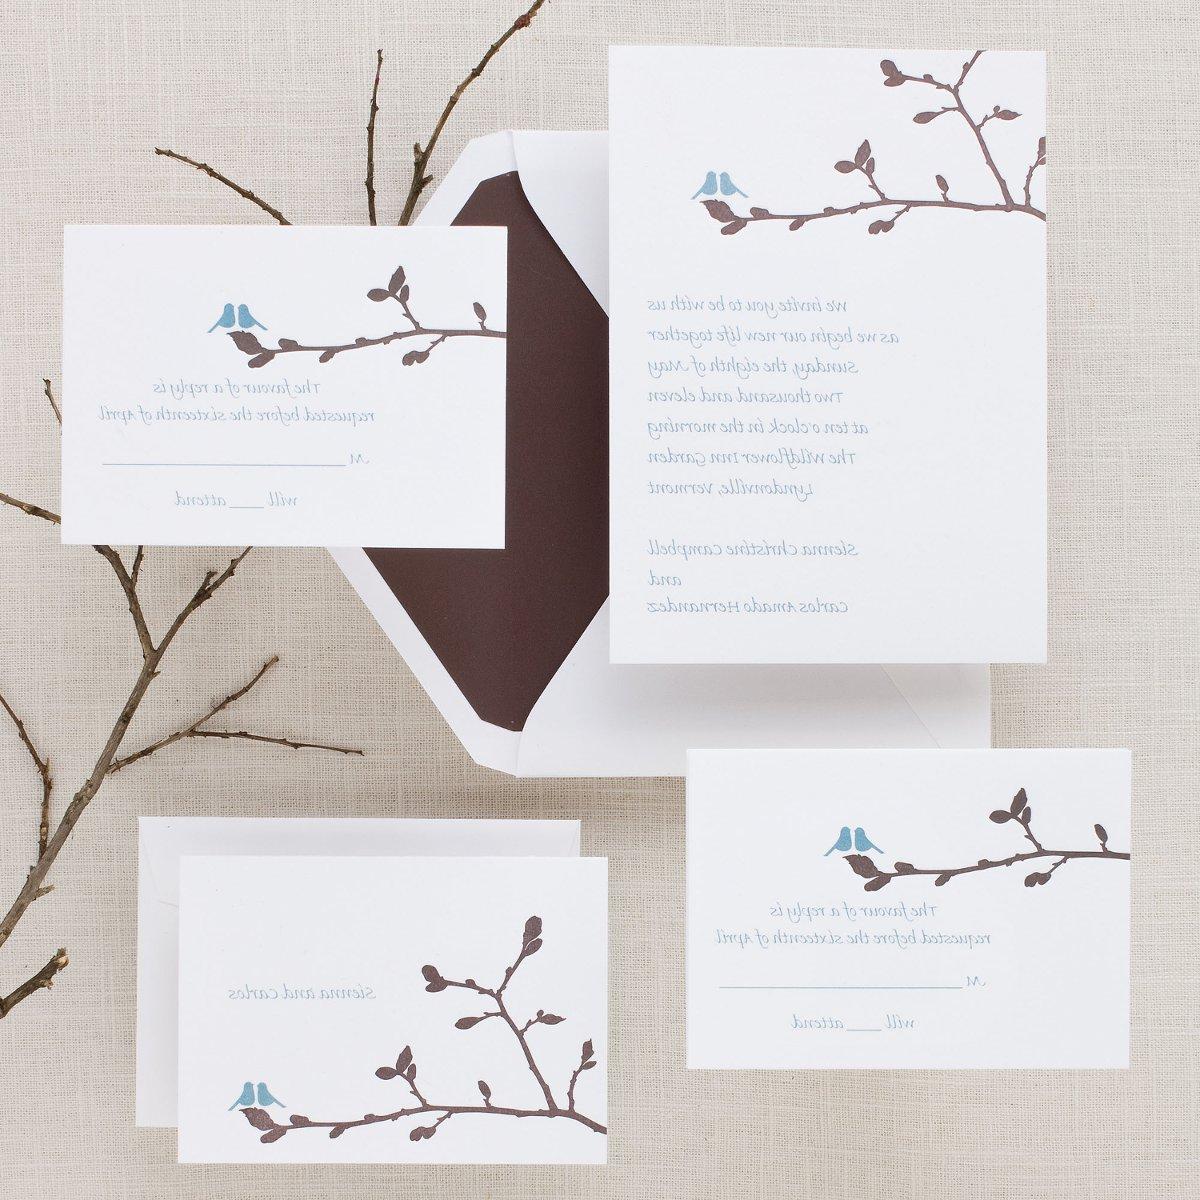 Phoebe - Everything about this invitation says quality, elegance     and your